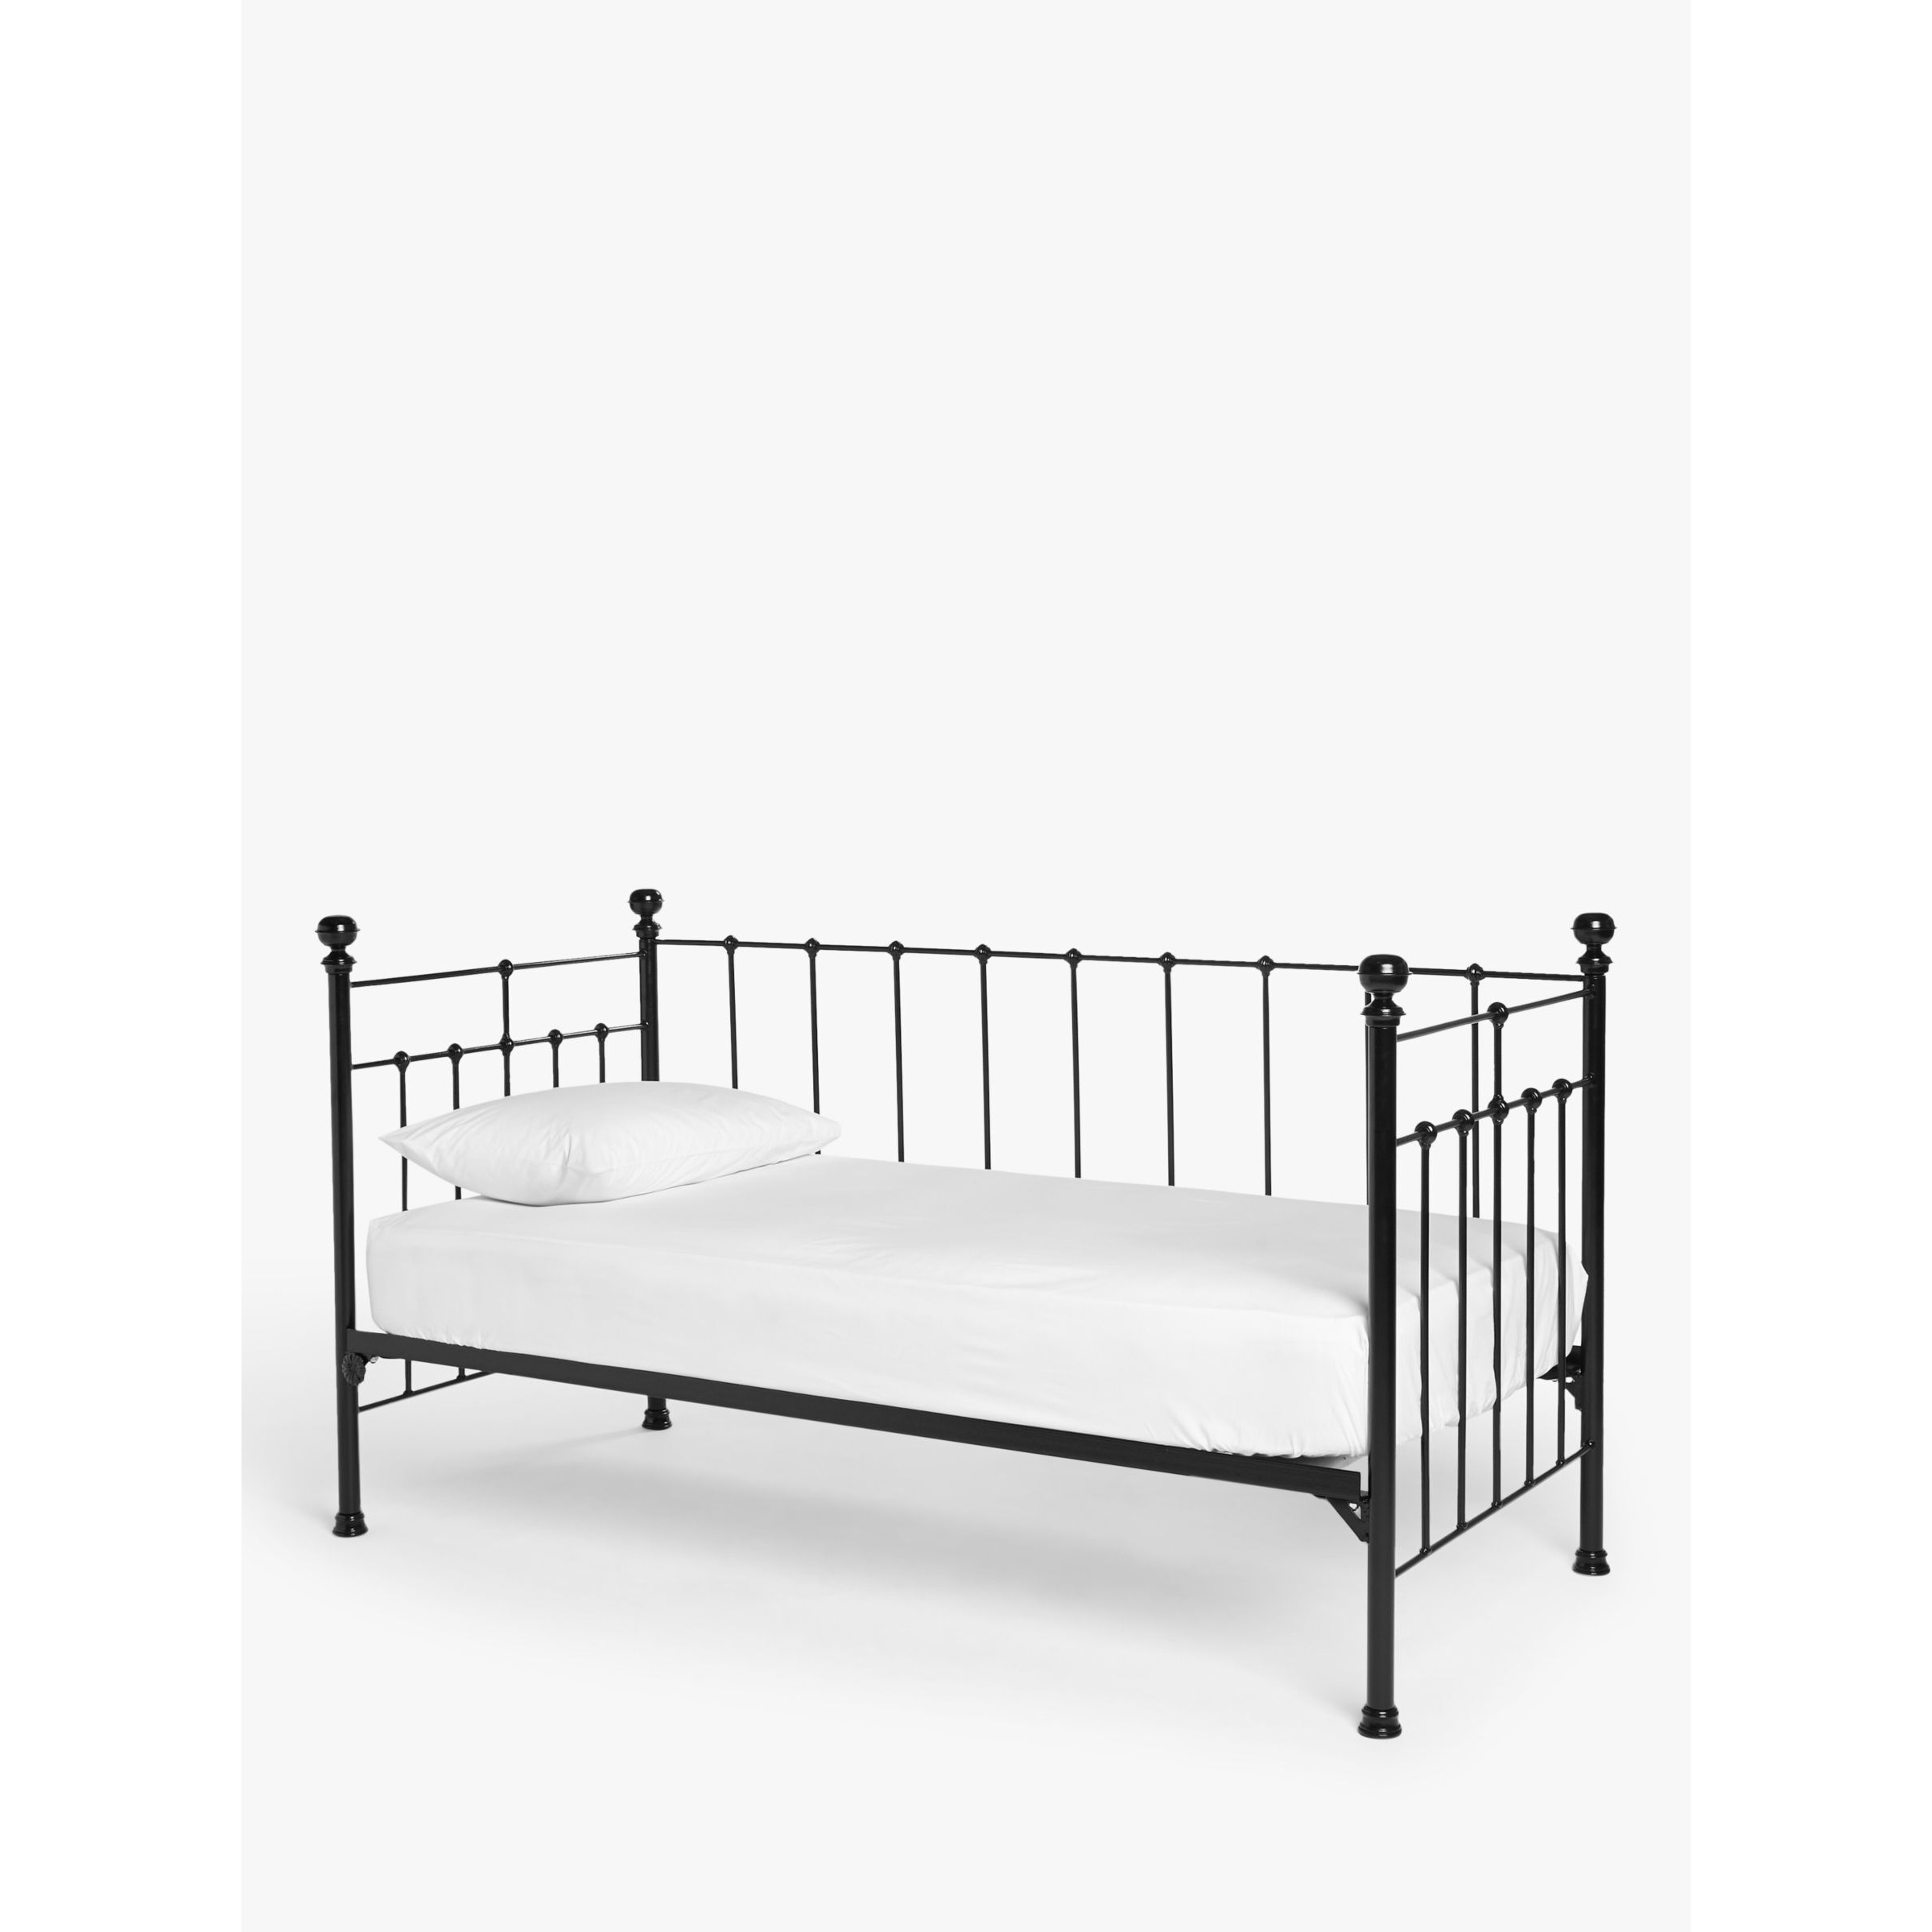 Wrought Iron And Brass Bed Co. Sophie Iron Day Bed Frame, Single - image 1